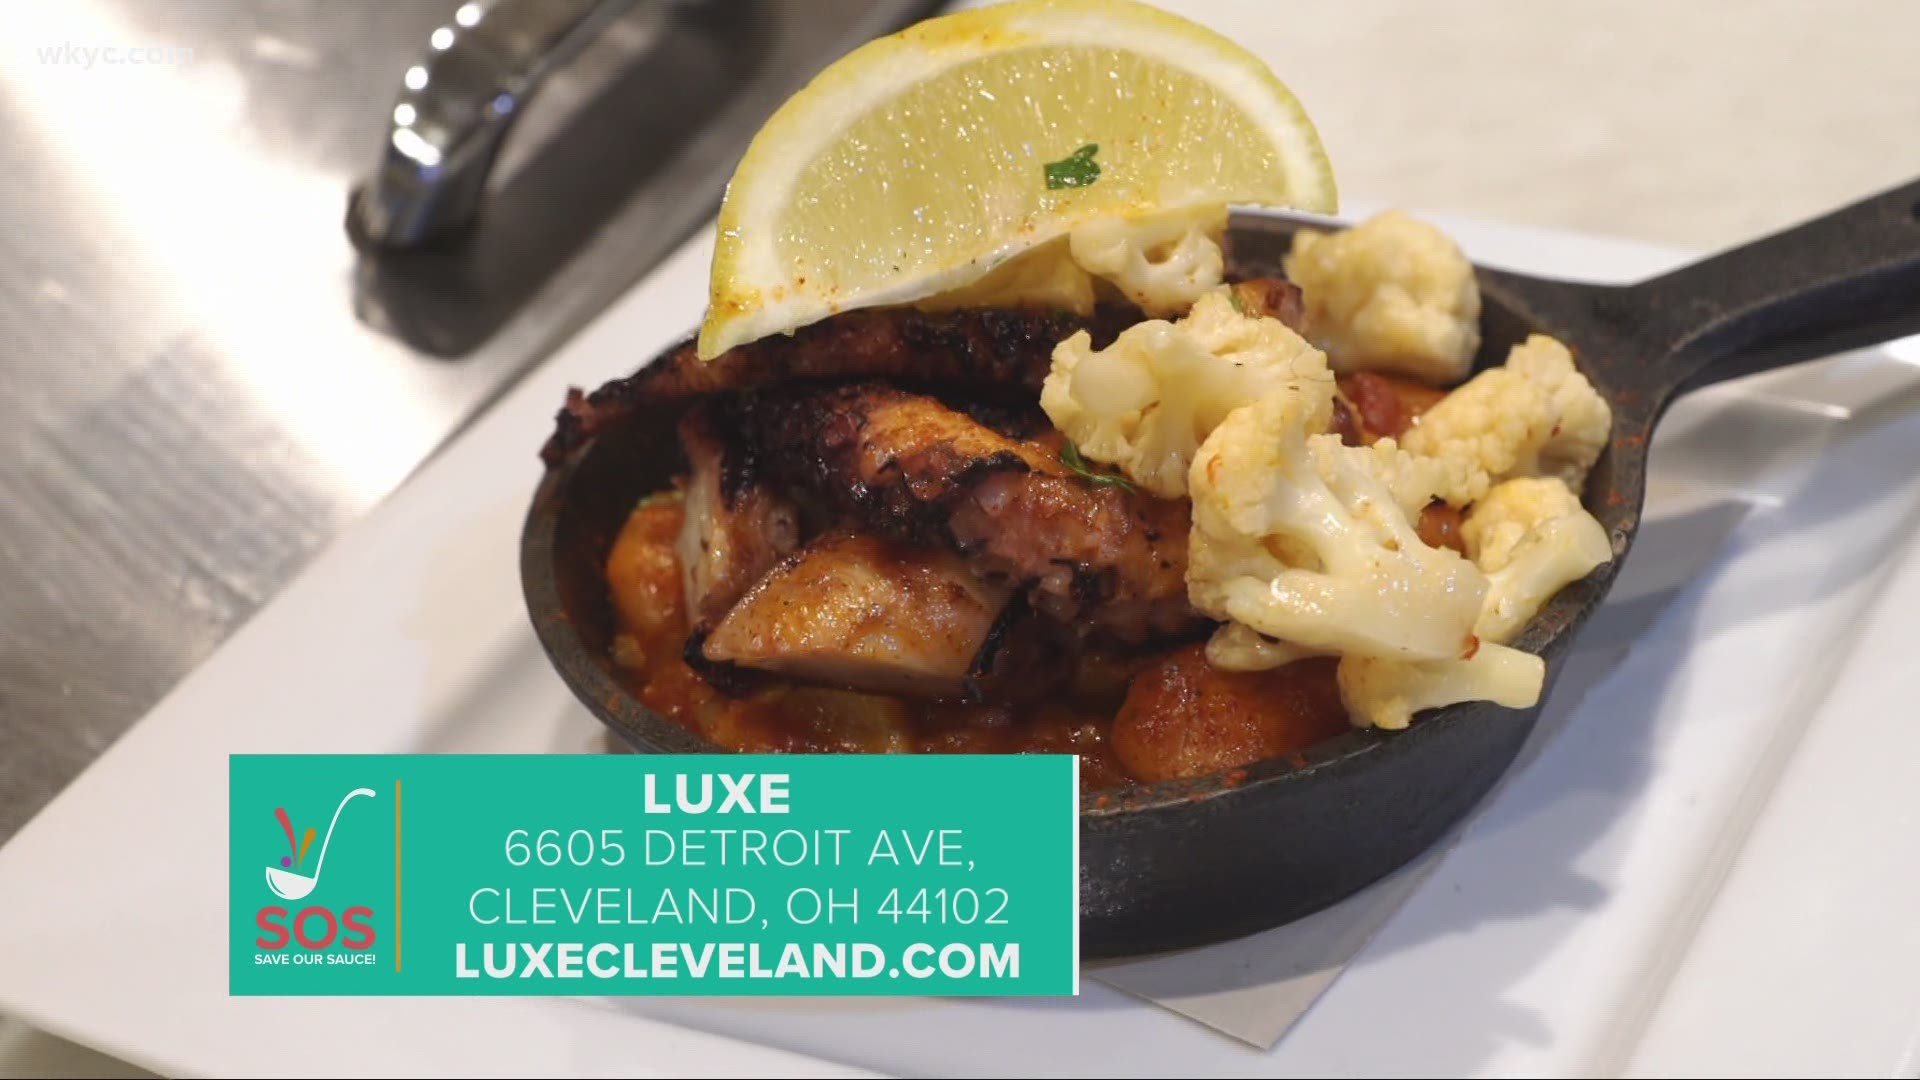 Looking for one of the best patios in Cleveland? Check out Luxe on Detroit Avenue.